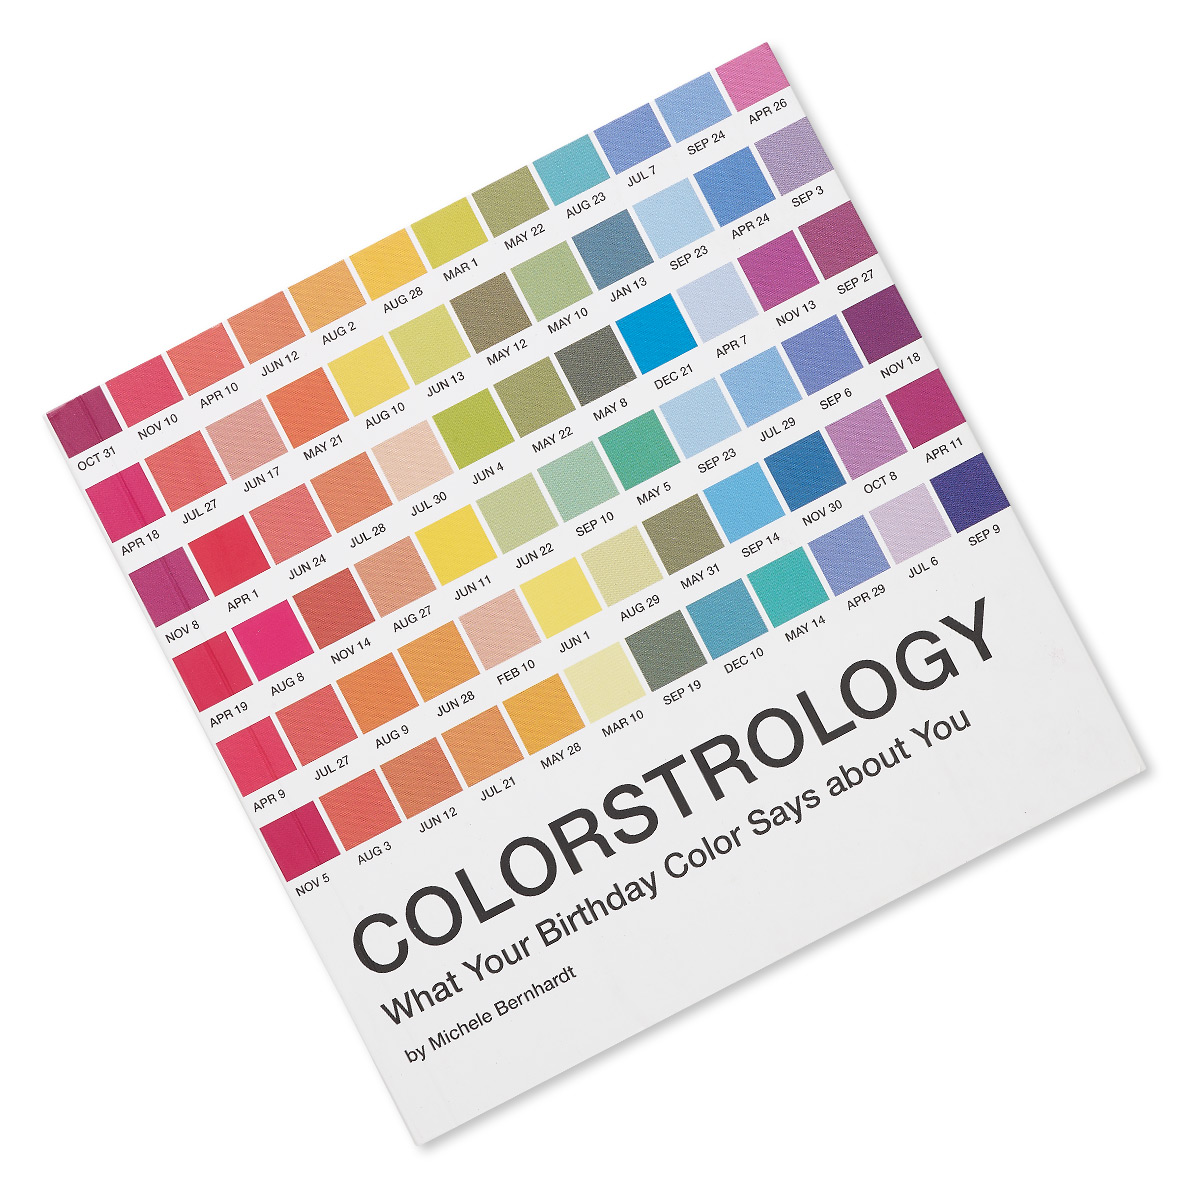 colorstrology birthday march 5